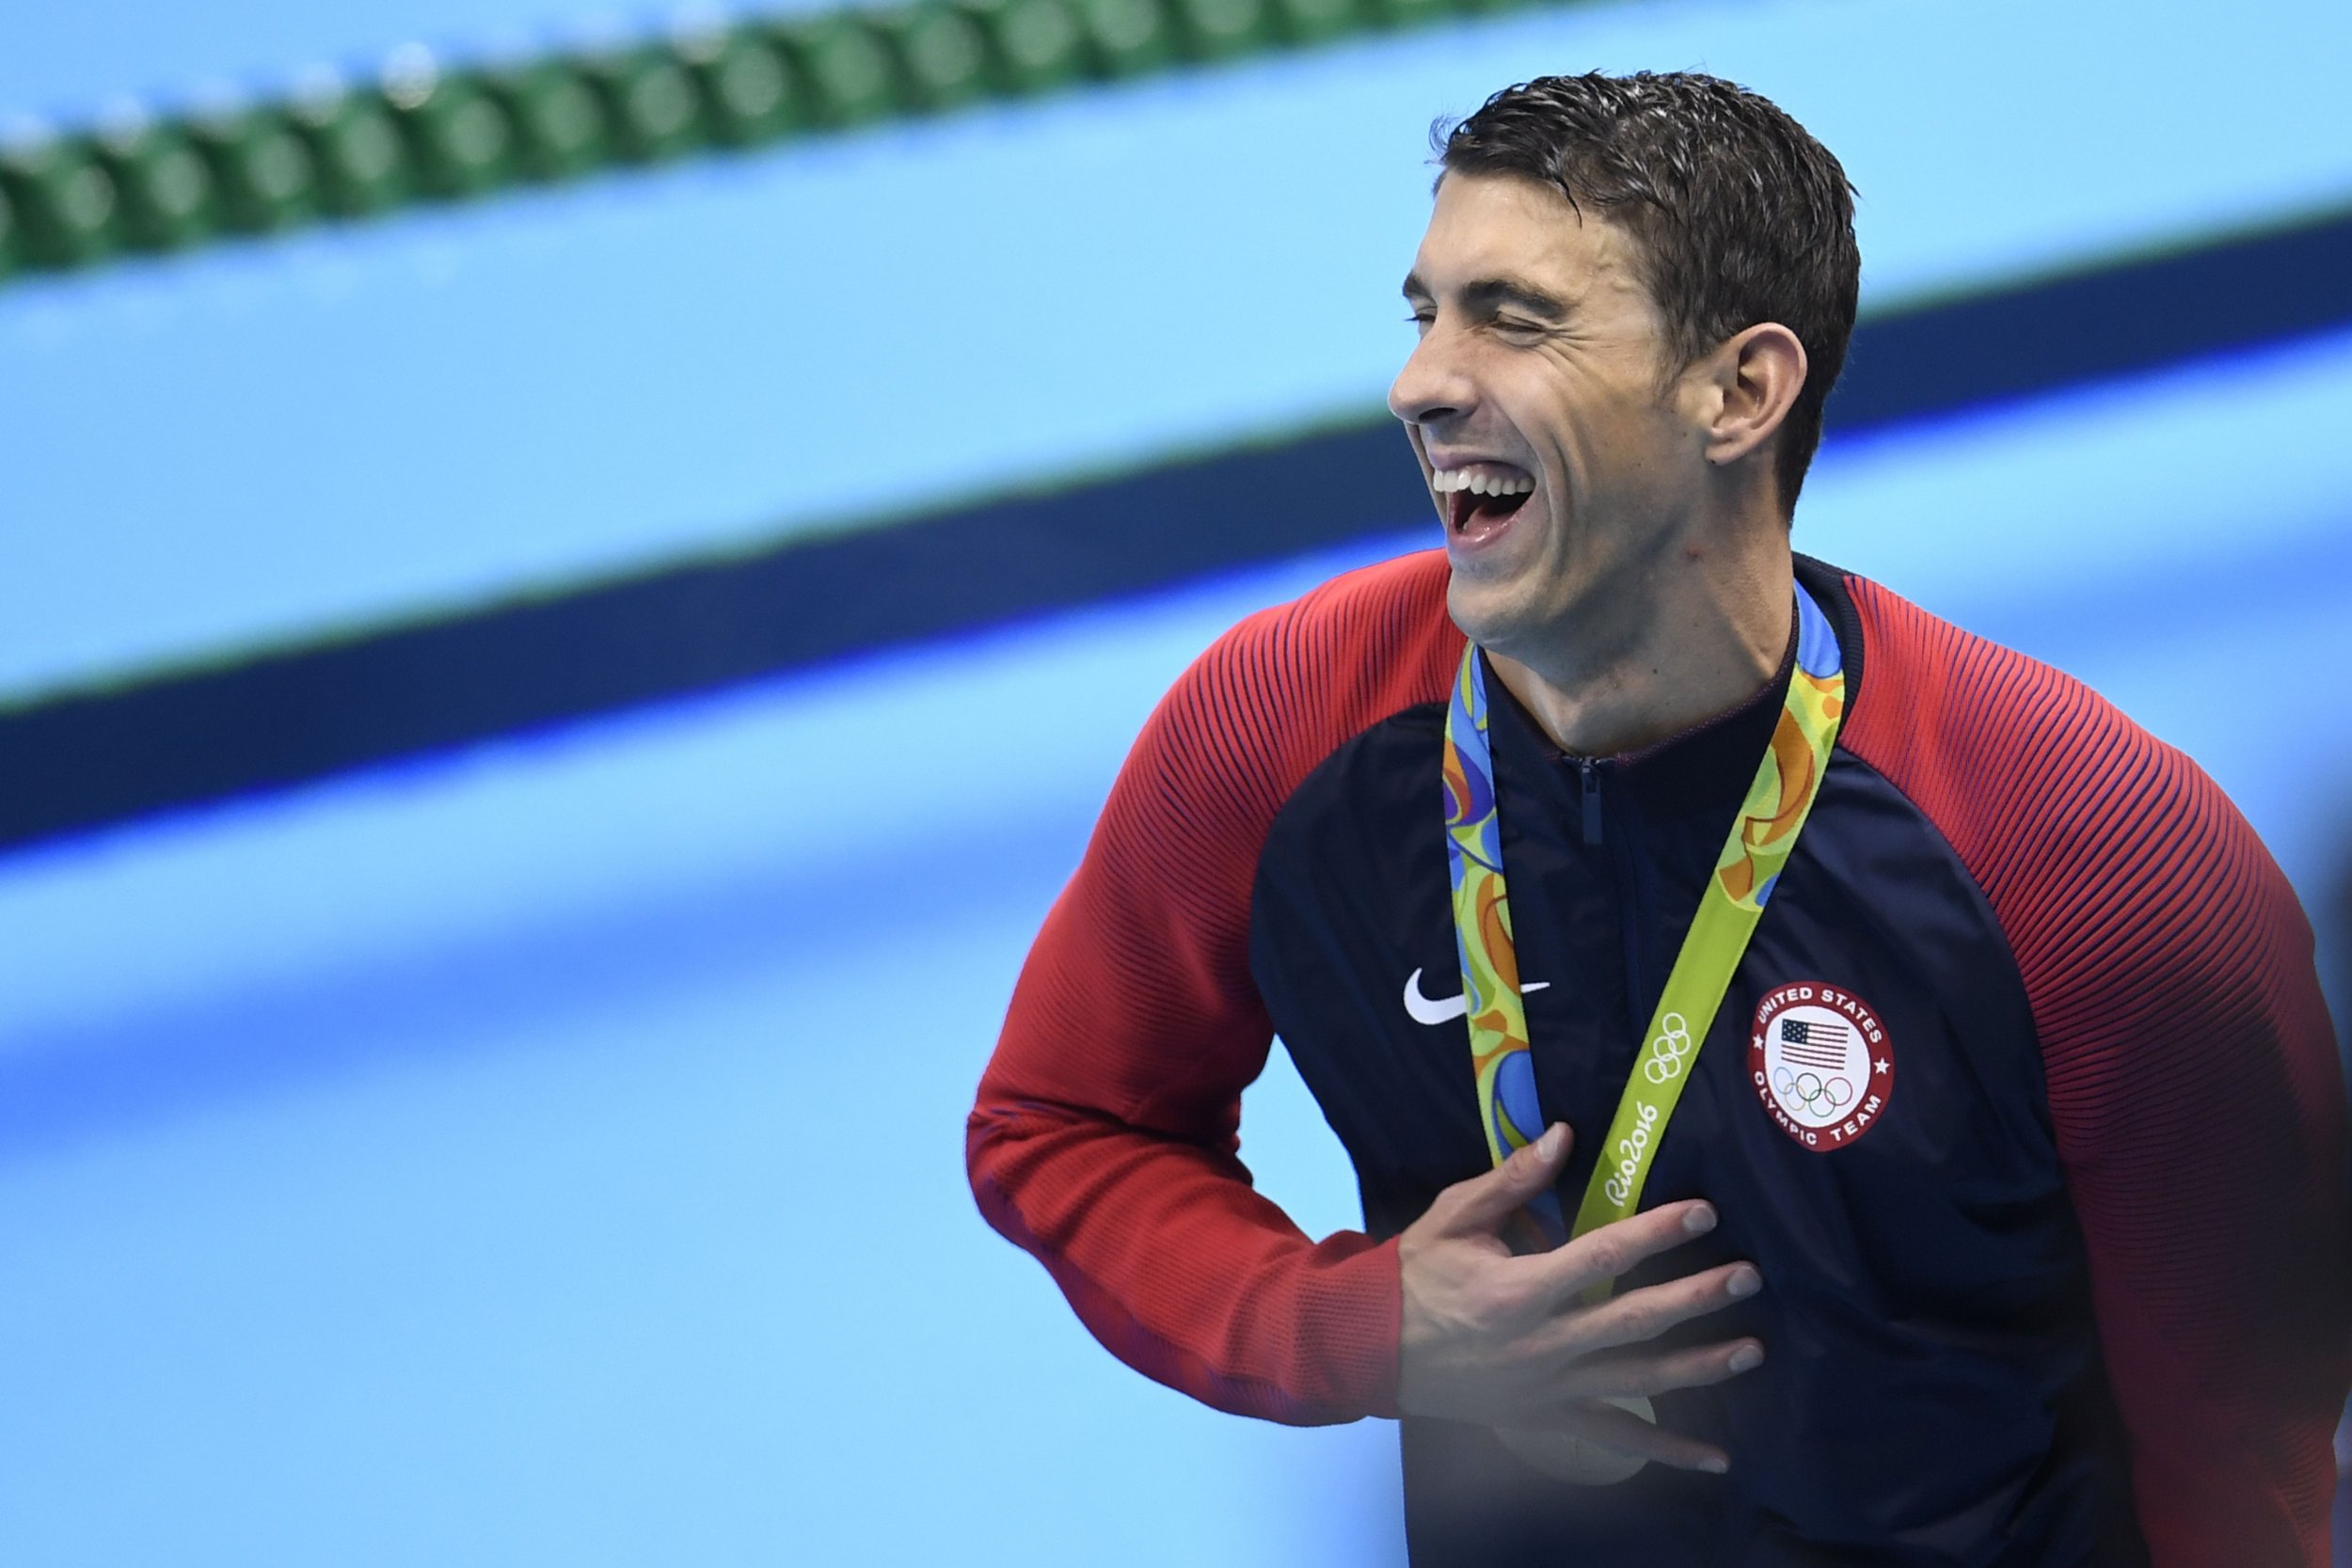 United States swimmer Michael Phelps.